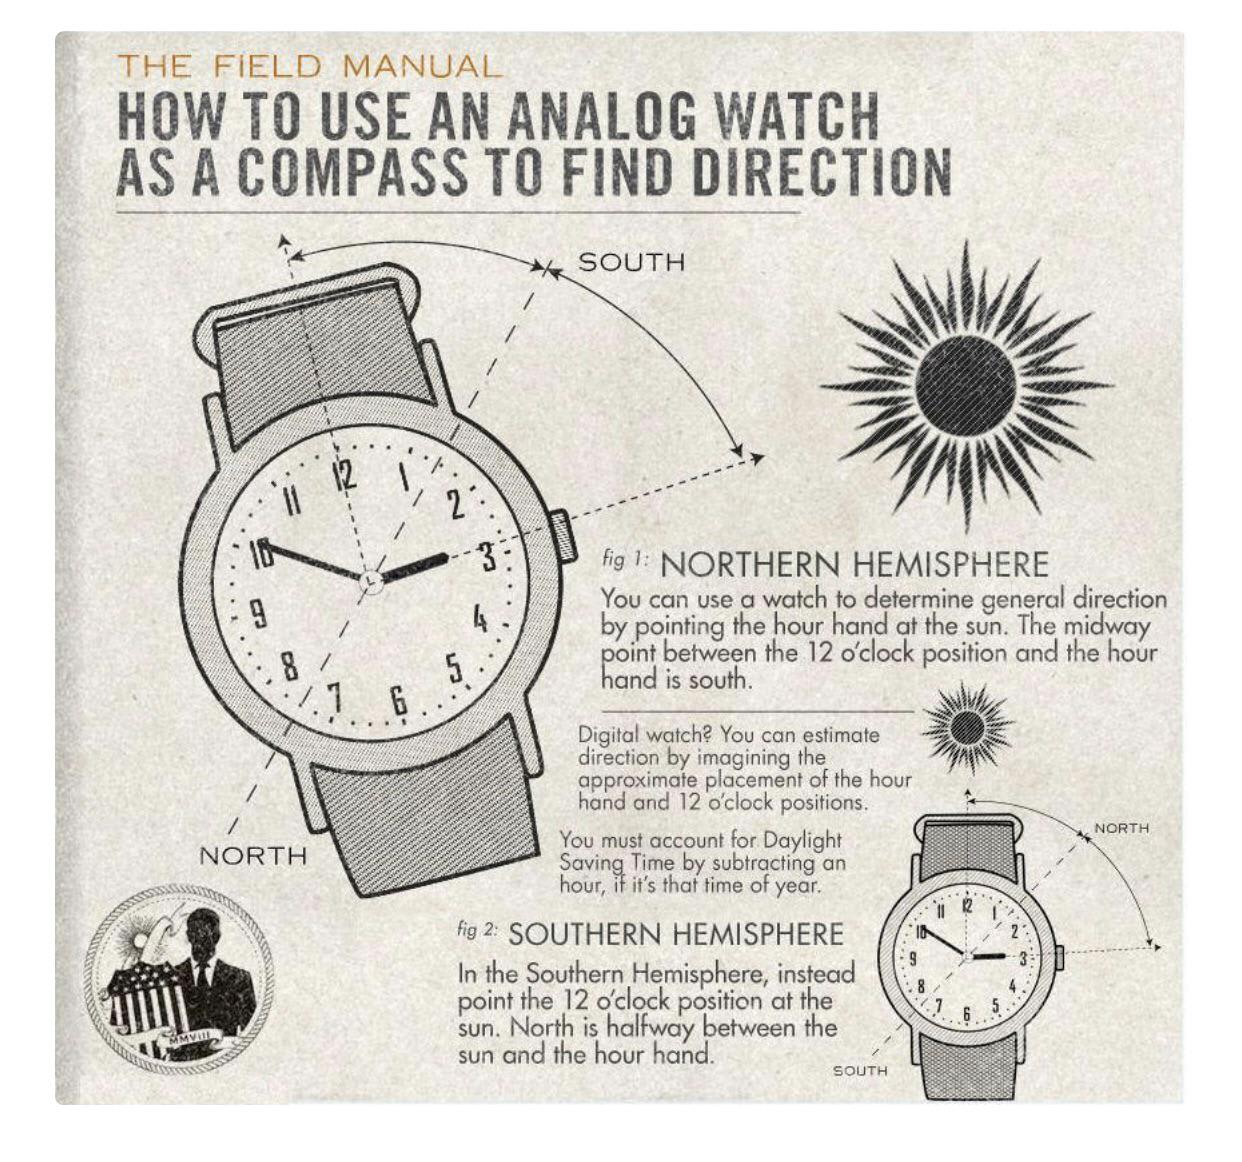 How to use an analog watch as a compass